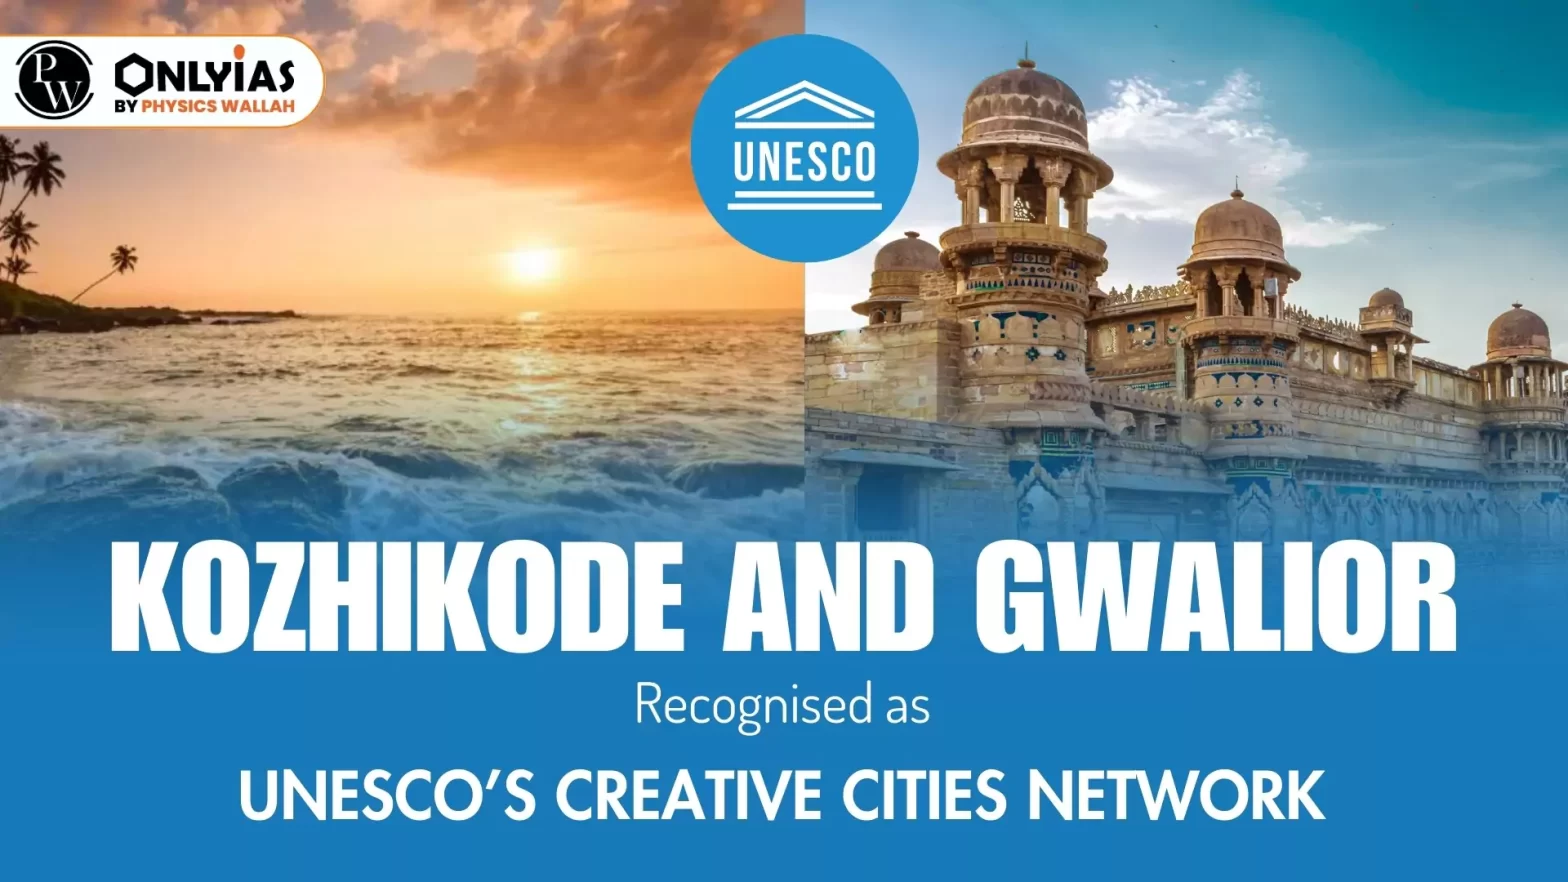 Kozhikode and Gwalior: Recognised as UNESCO’s Creative Cities Network